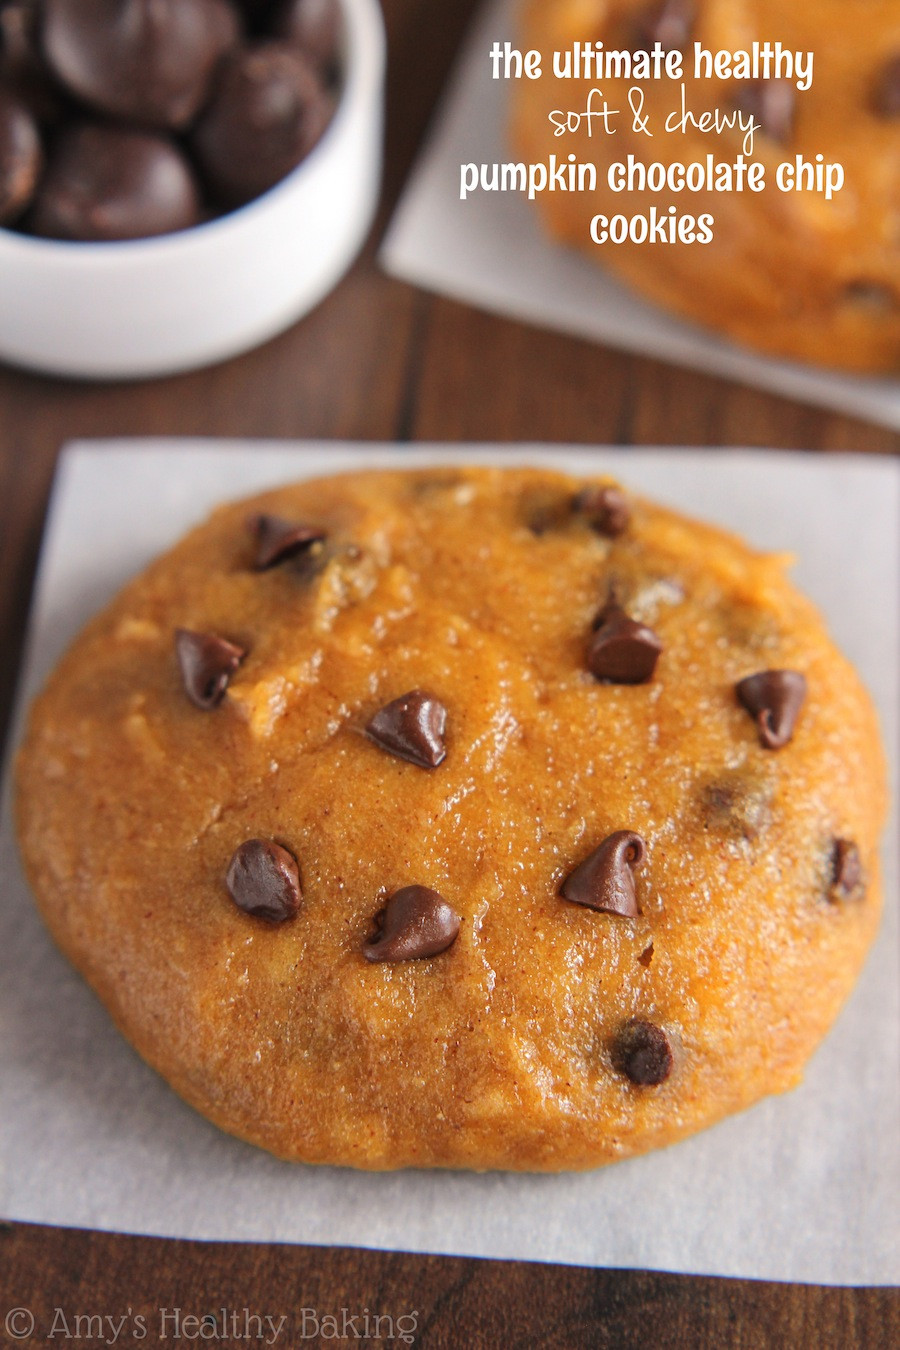 Healthy Chewy Chocolate Chip Cookies
 Ultimate Healthy Soft & Chewy Pumpkin Chocolate Chip